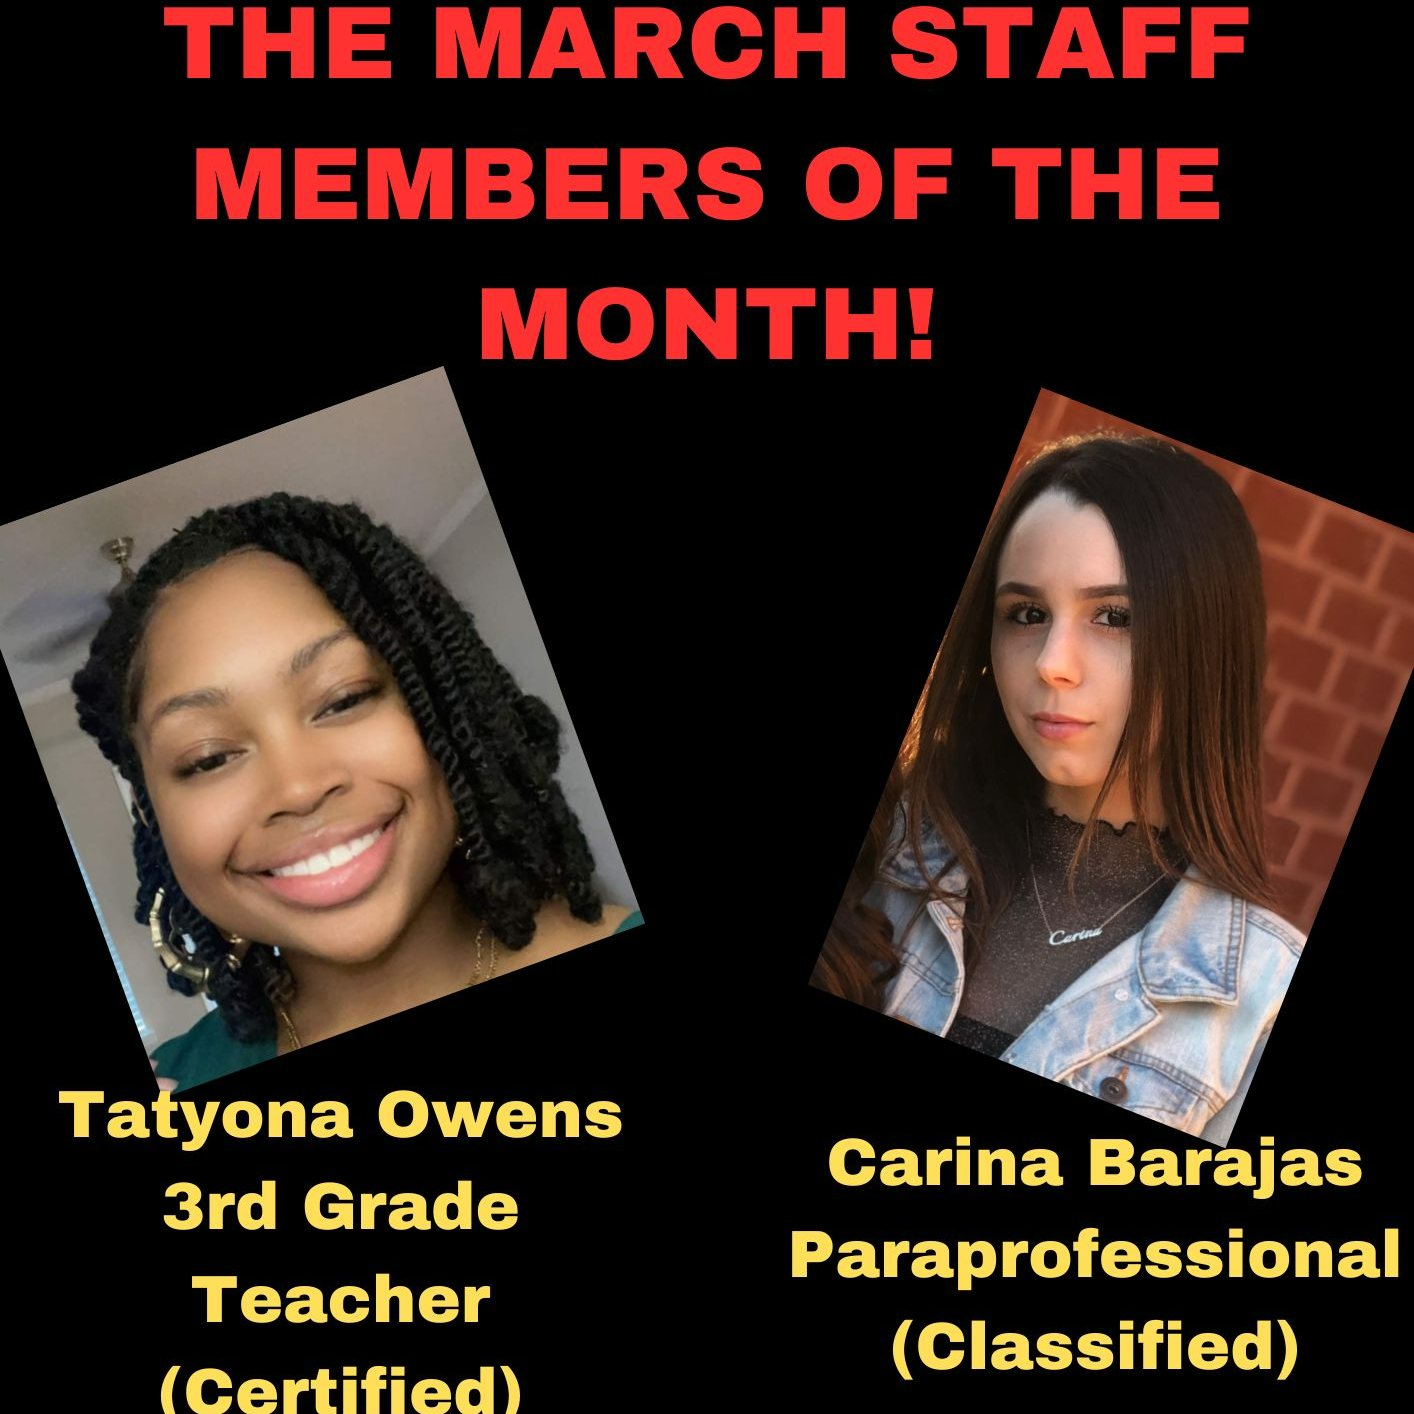 Congratulations to our March staff members of the month; Ms. Owens, and Ms. Barajas